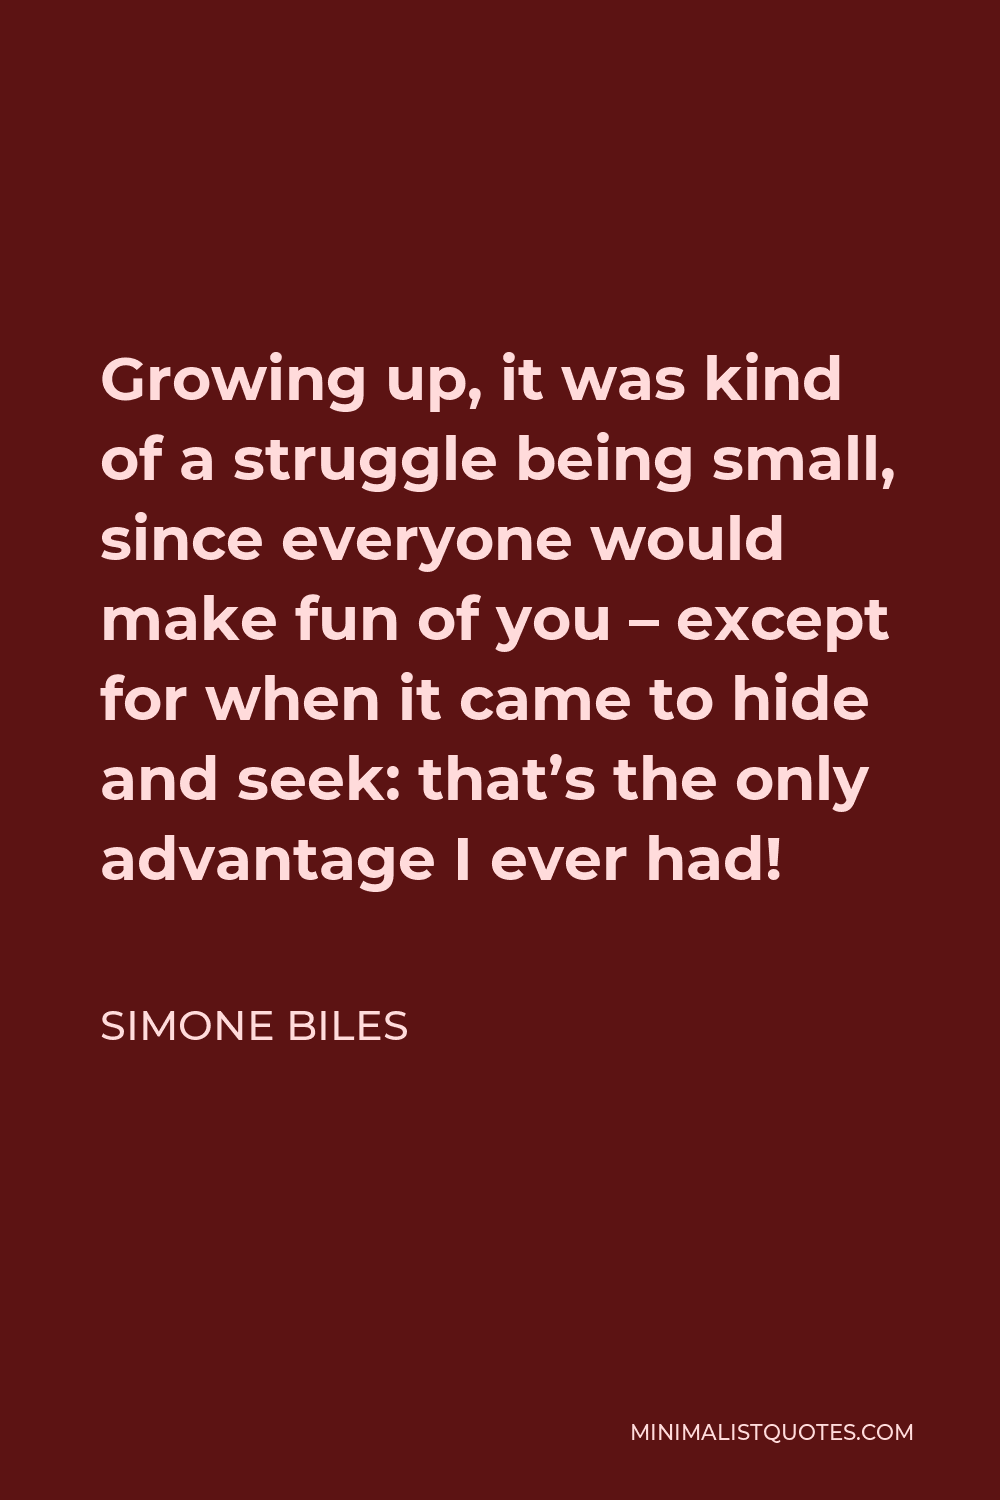 Simone Biles Quote - Growing up, it was kind of a struggle being small, since everyone would make fun of you – except for when it came to hide and seek: that’s the only advantage I ever had!